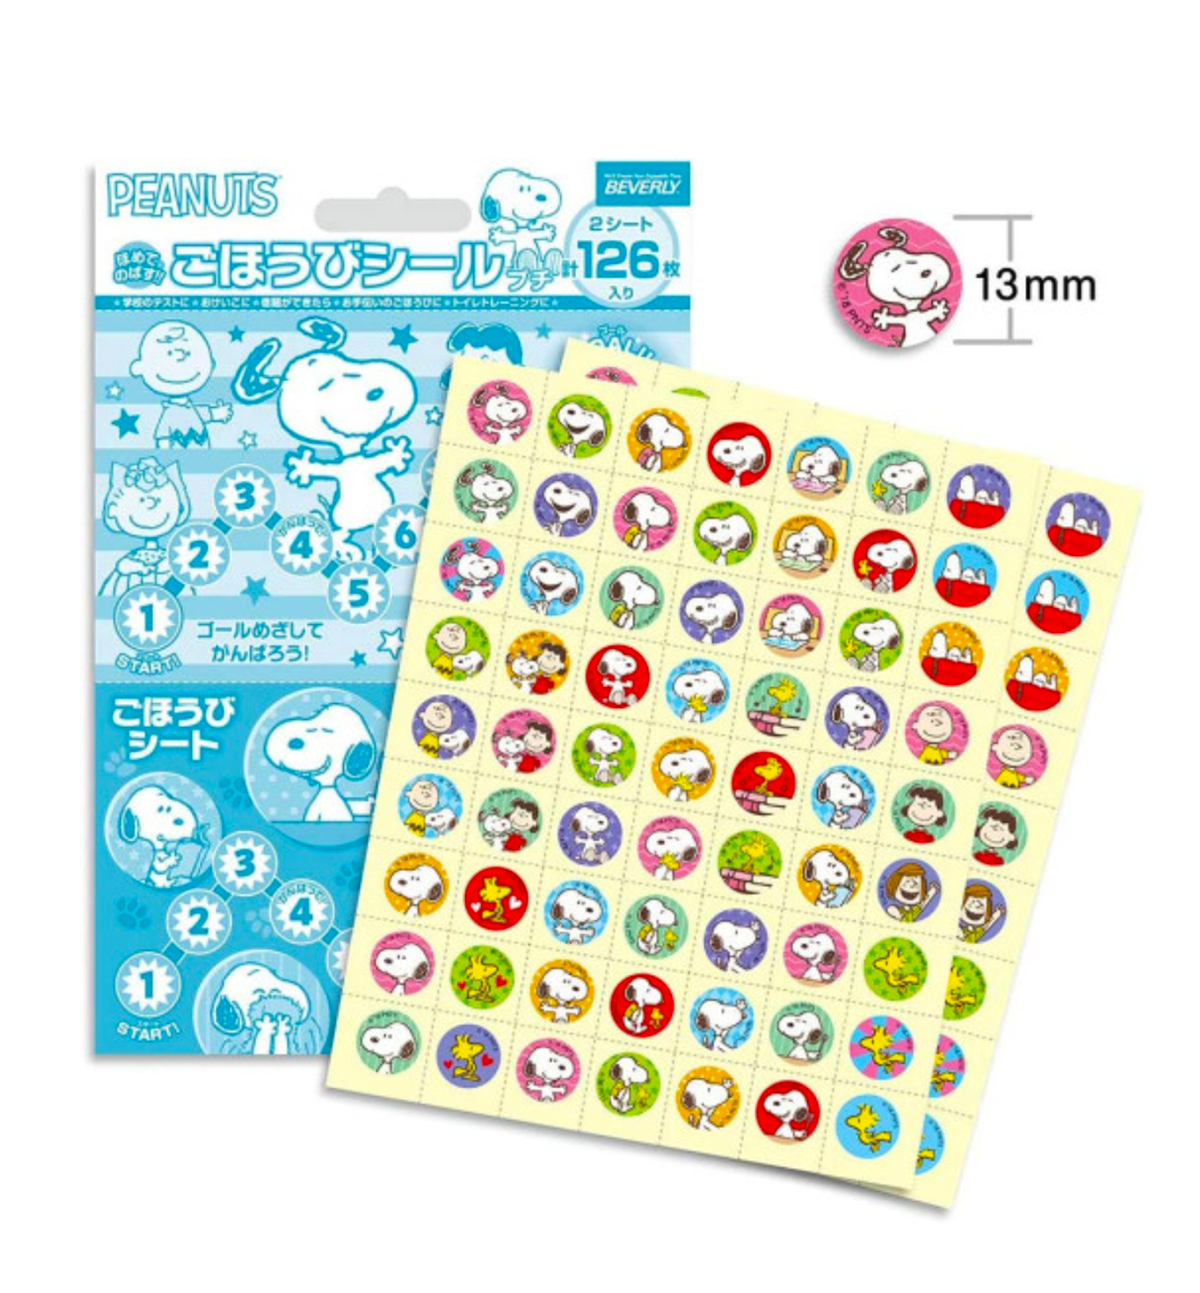 Peanuts Snoopy & Friends Faces Stickers [126pcs]